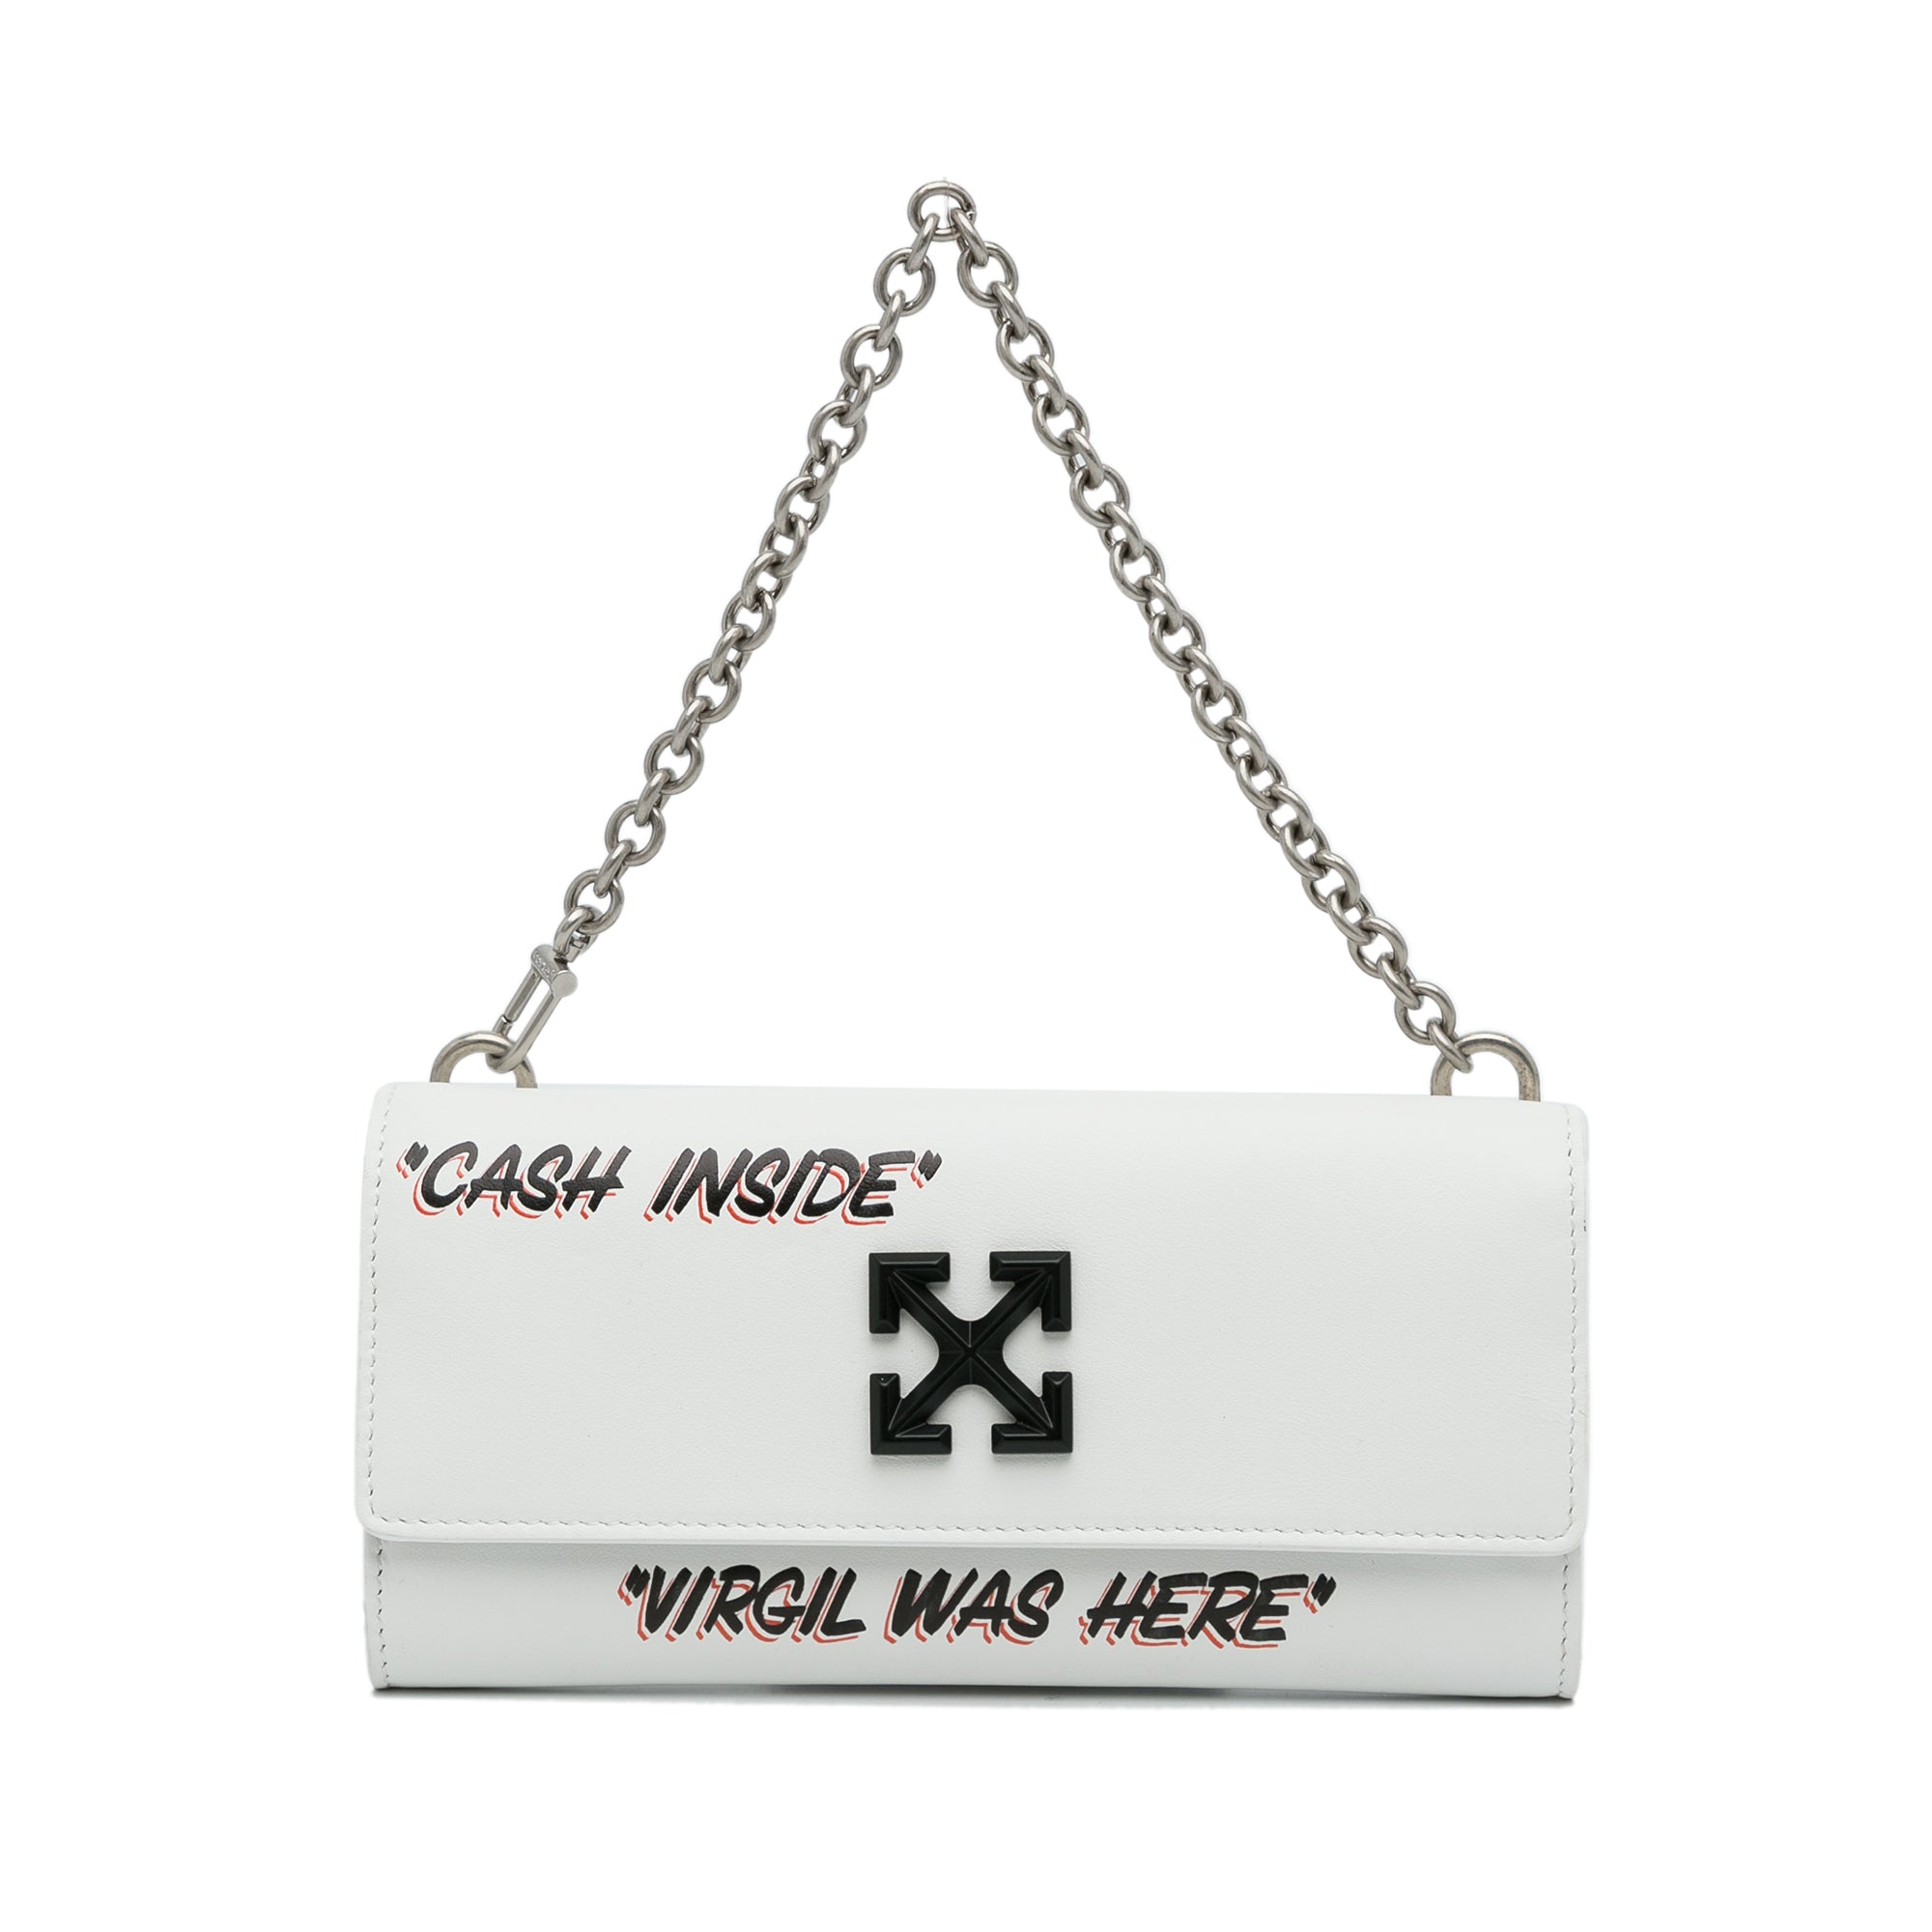 OFF-WHITE QUOTE PHONE CROSS BODY BAG